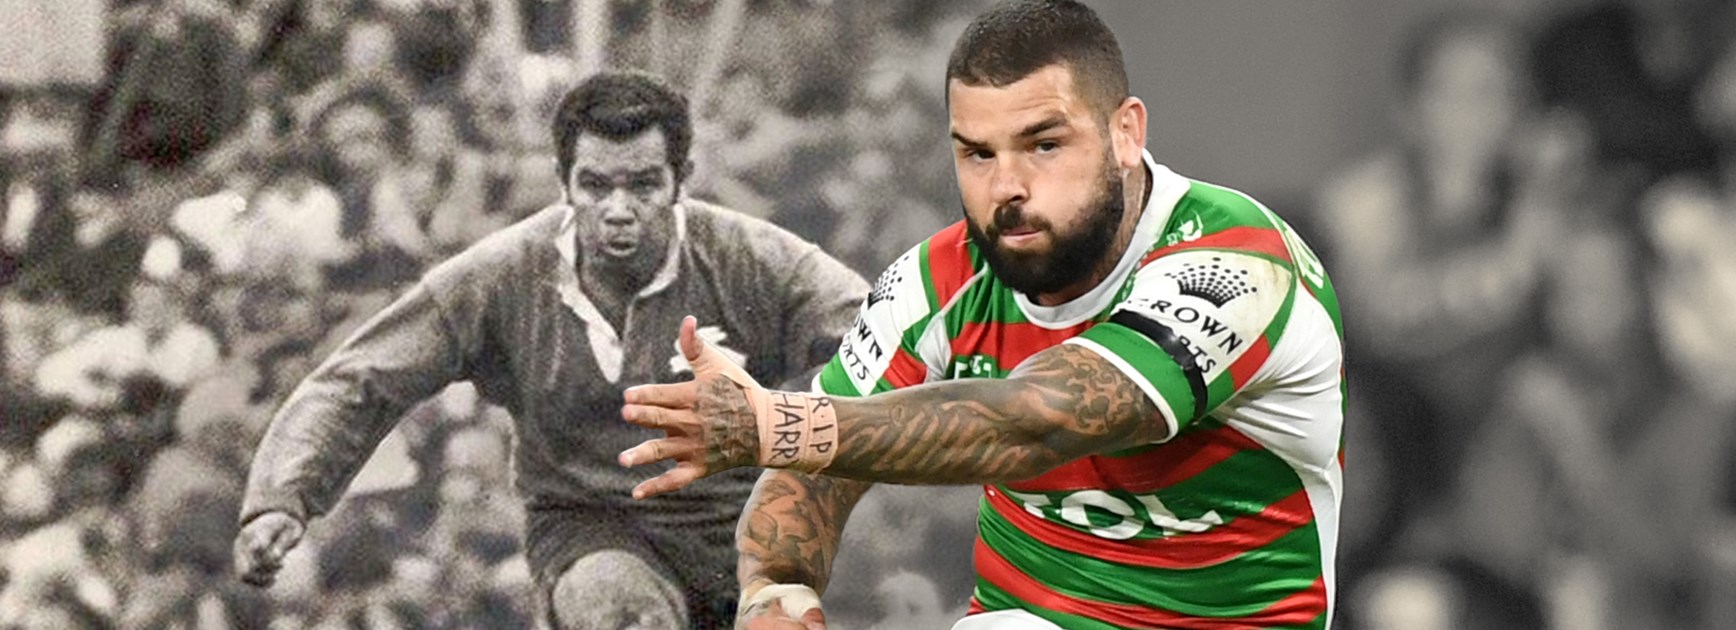 Reynolds poised to surpass Rabbitohs royalty